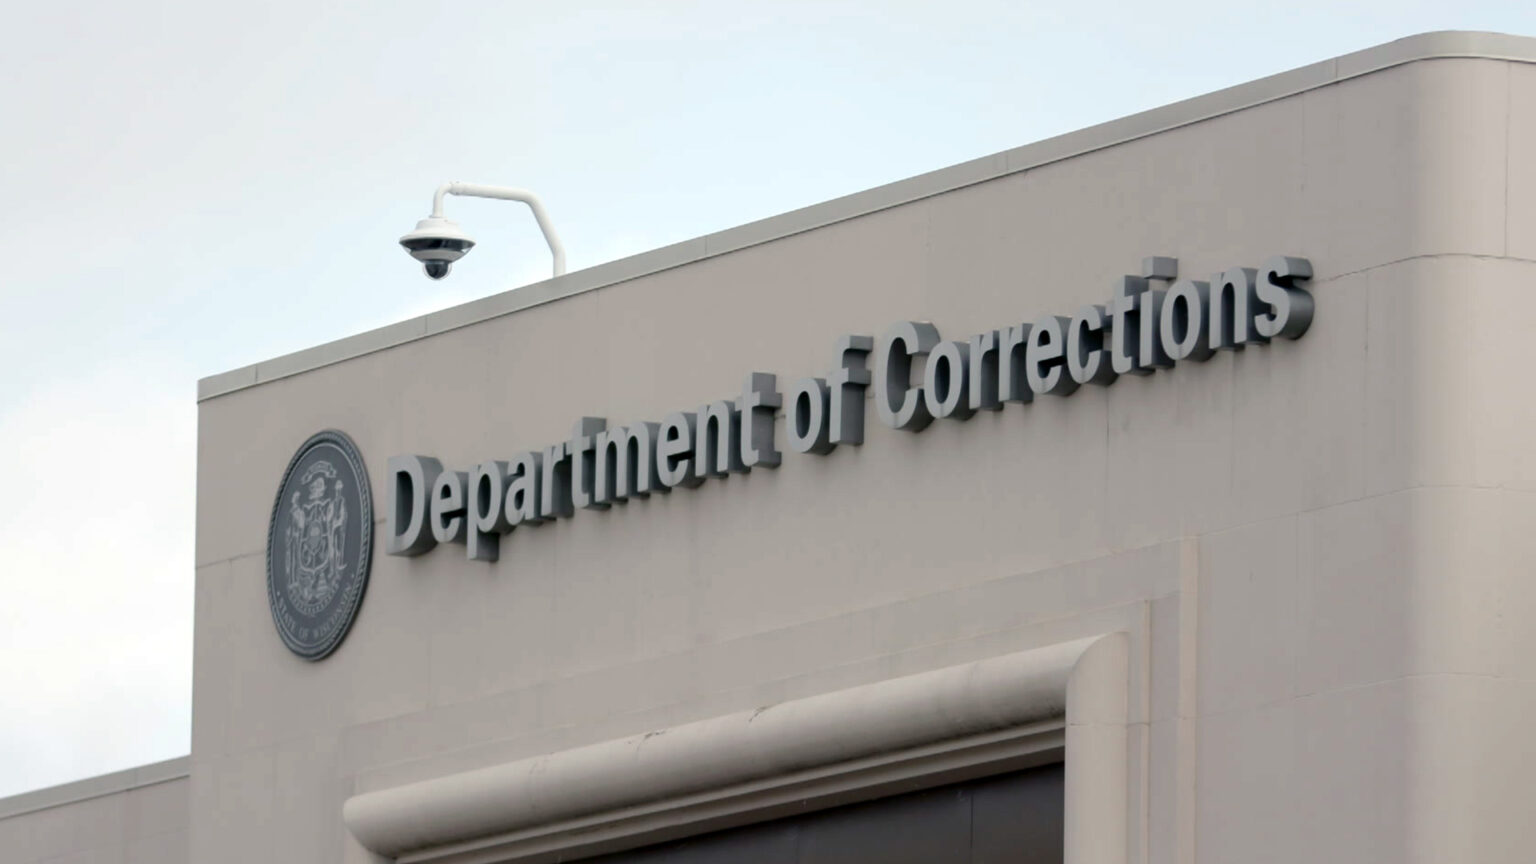 An entrance sign near the top of a  concrete-masonry building includes a Wisconsin state seal and letters spelling out Department of Corrections, with a surveillance camera mounted from the edge of the roof.